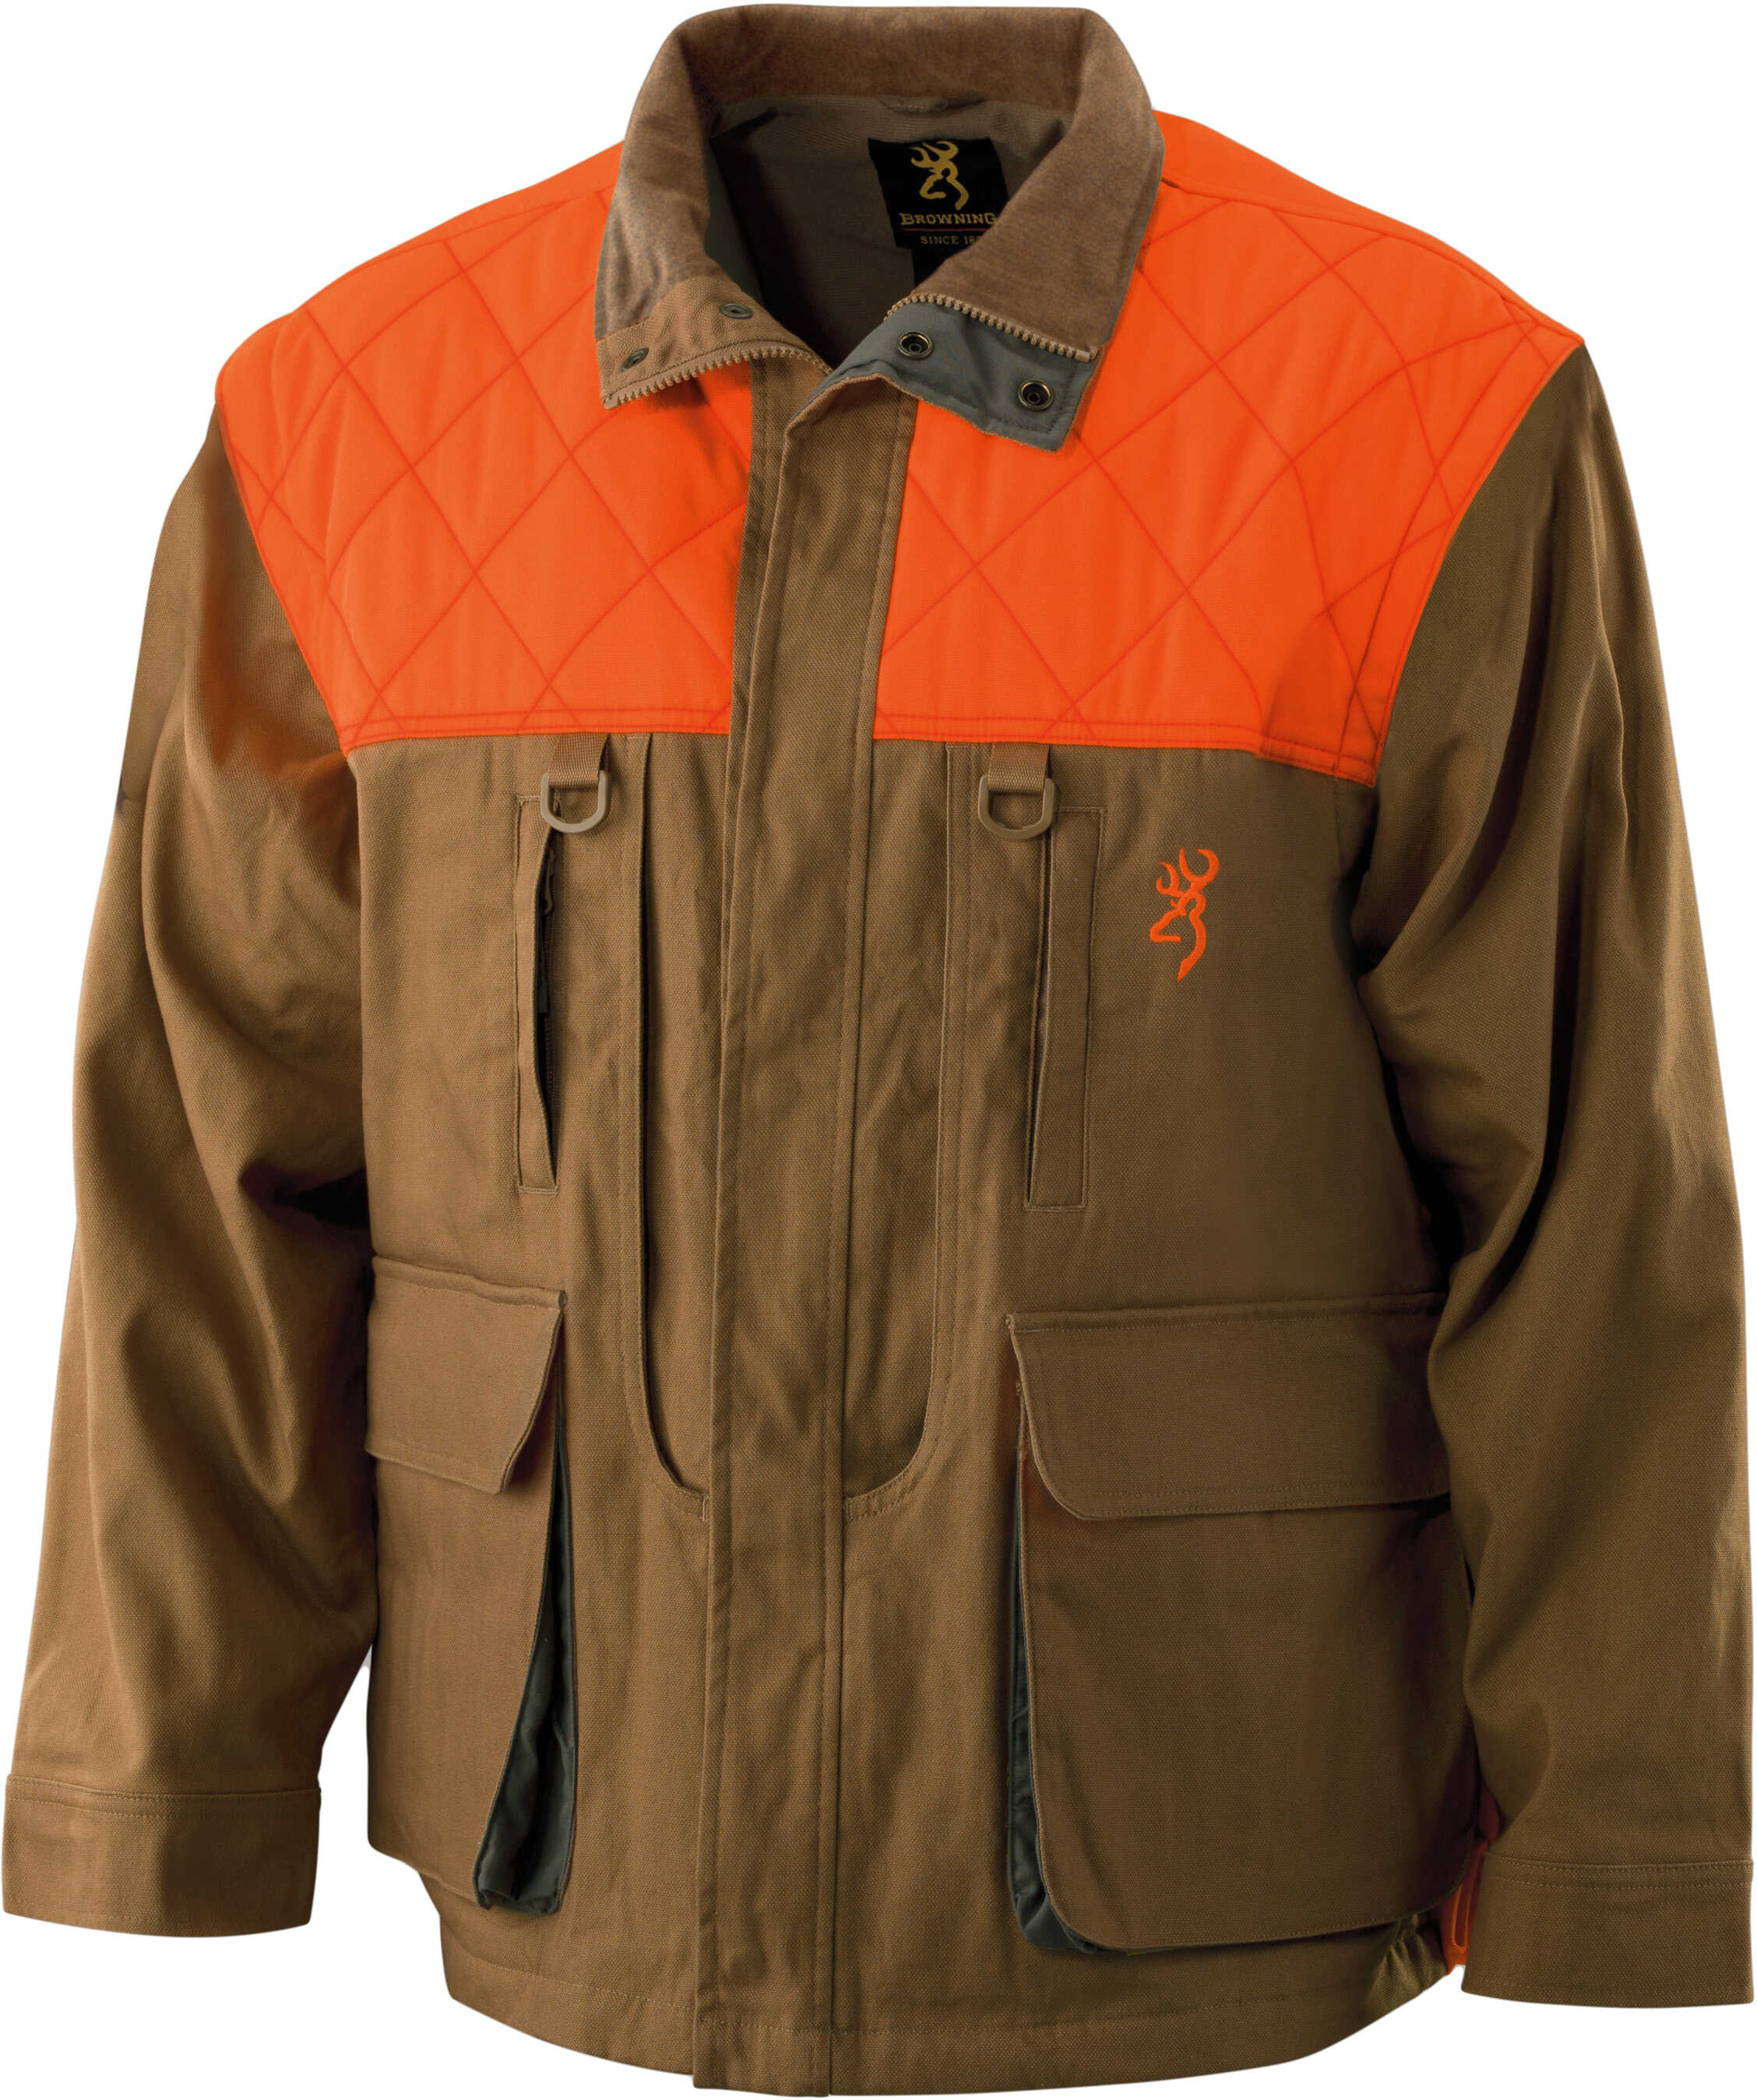 Browning Pheasants Forever Jacket Large Md: 3041163203